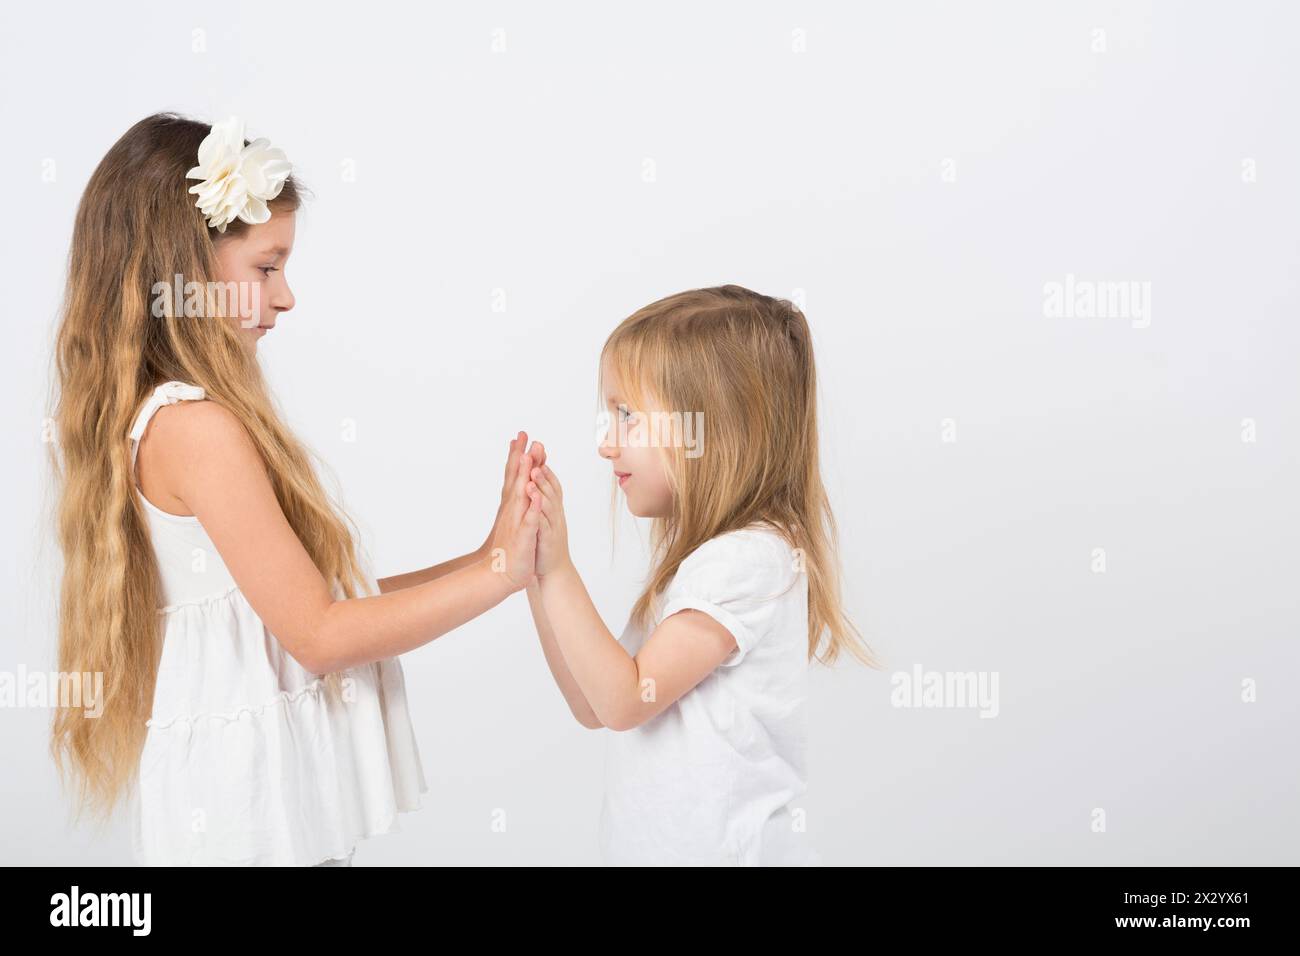 Two little girls dressed in white playing slapping each others hands Stock Photo